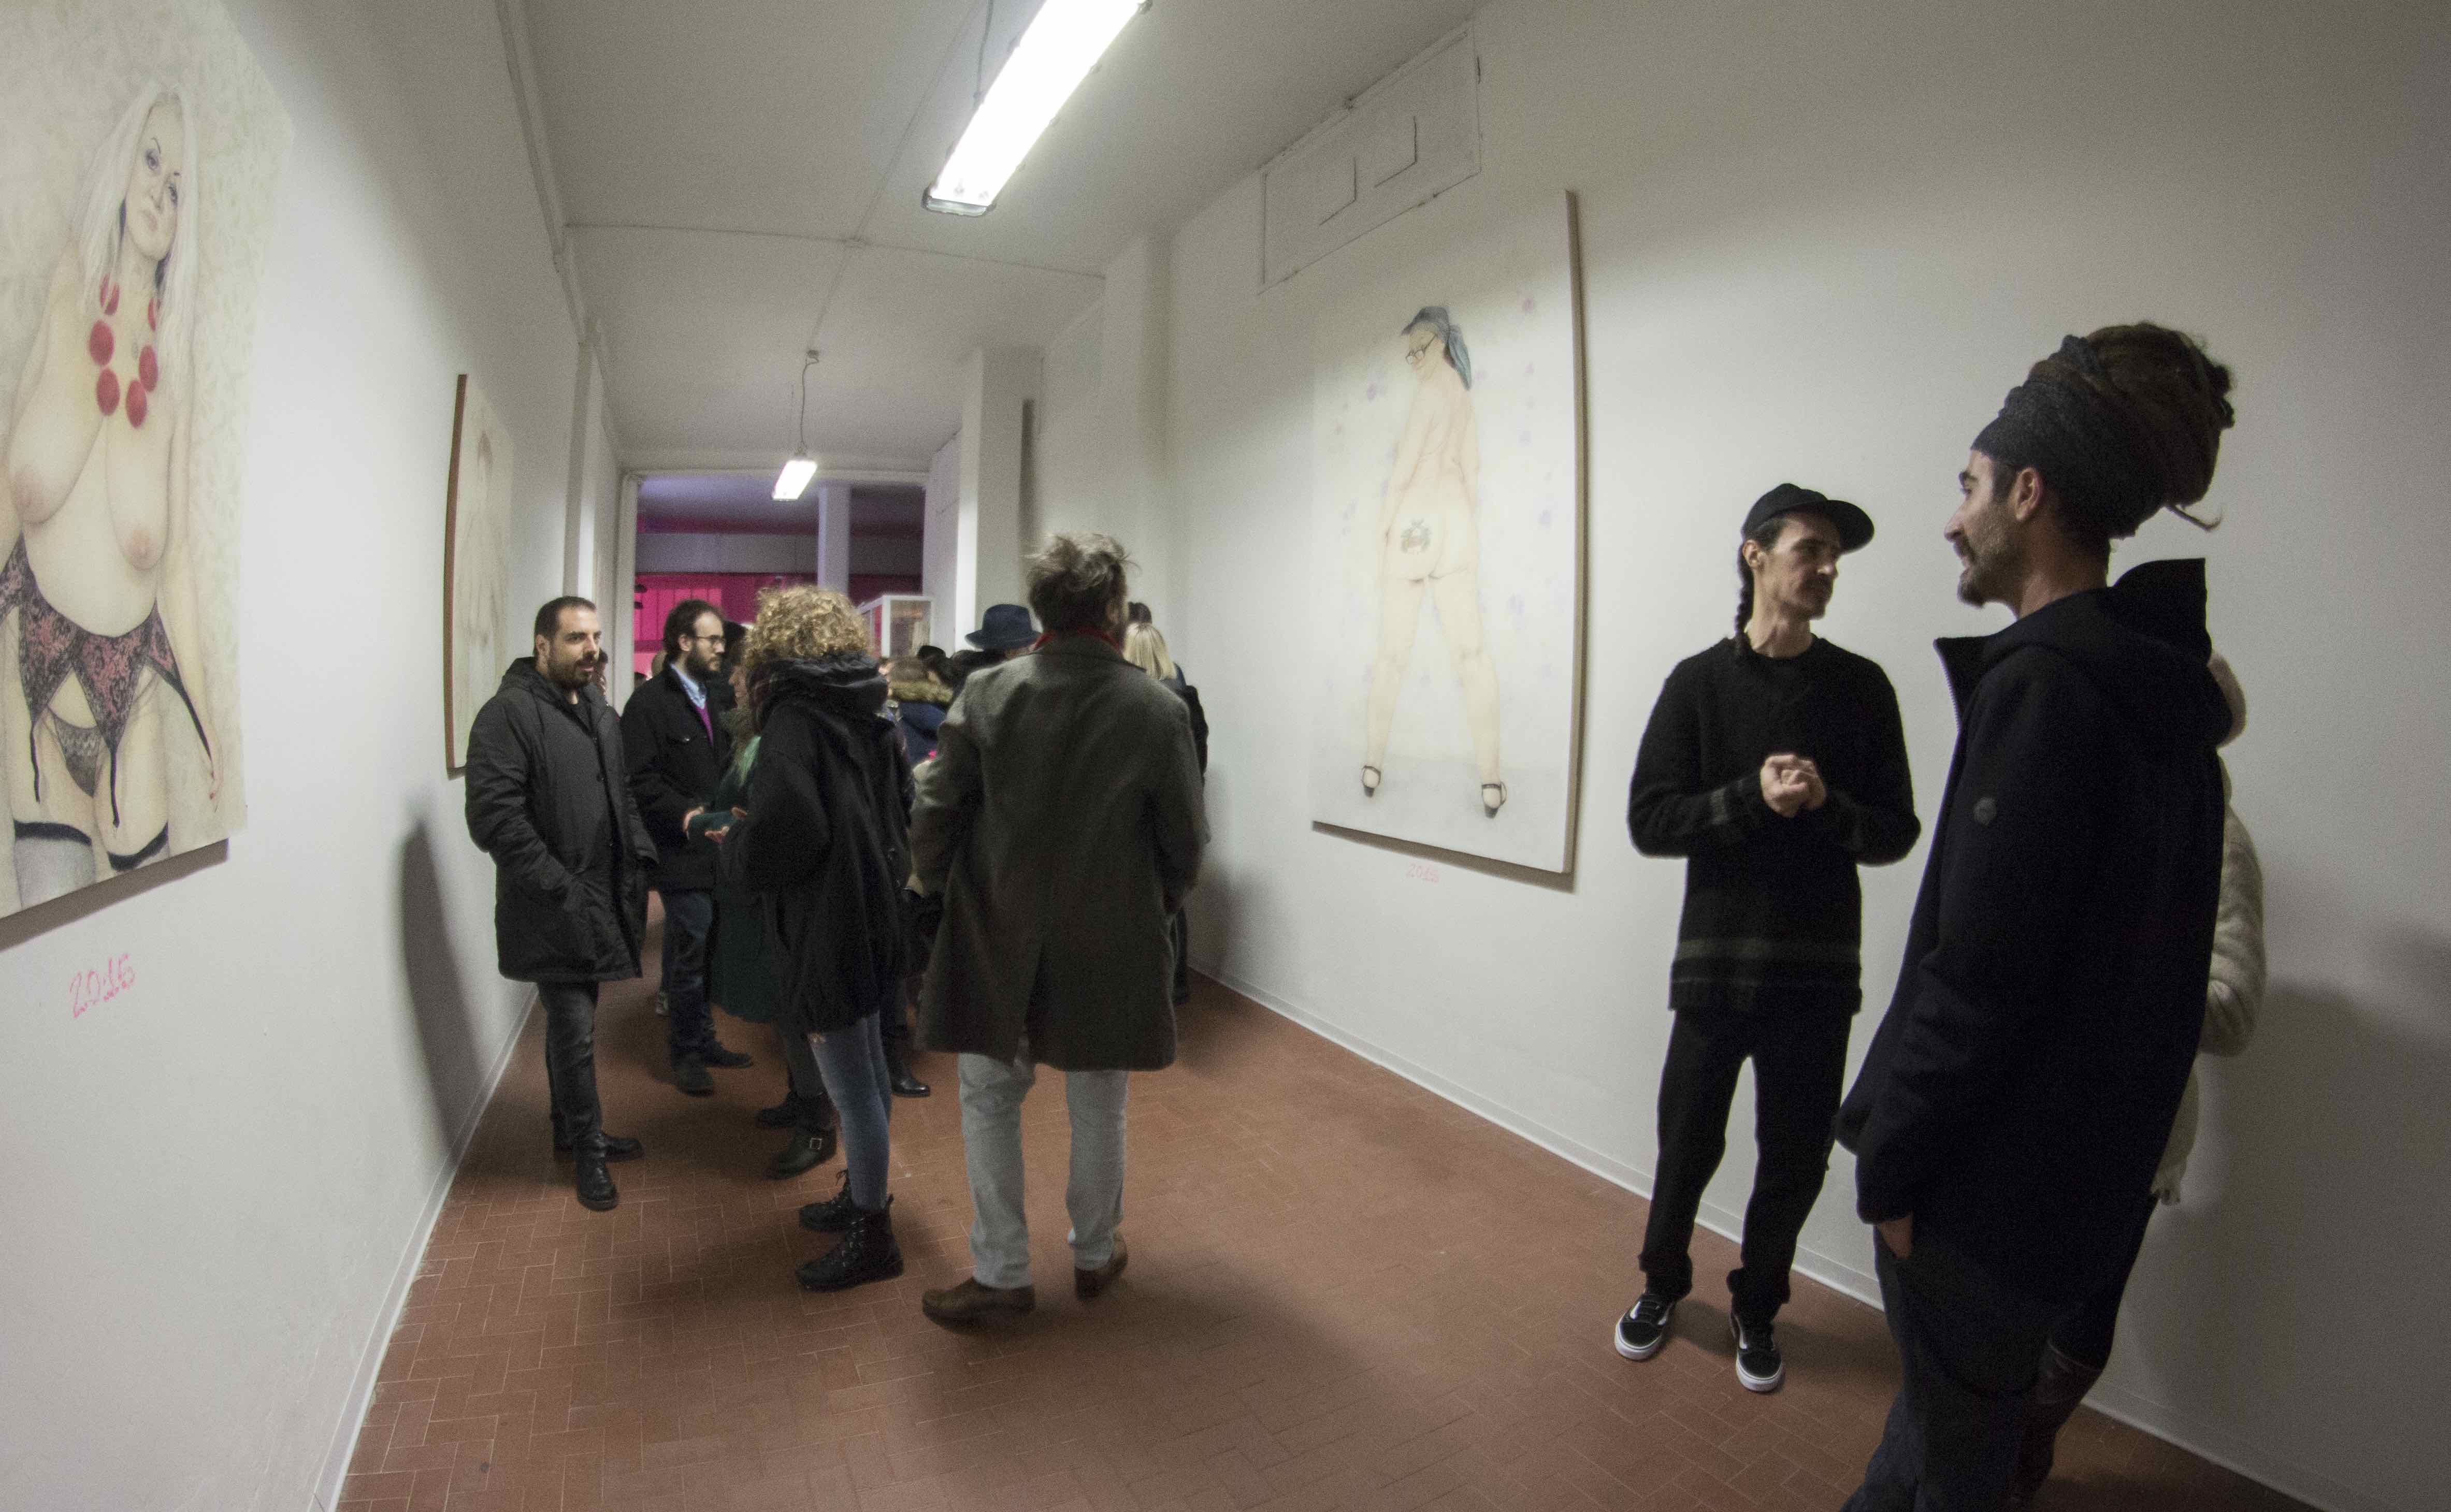 206 - the Unknownow gallery, Bari